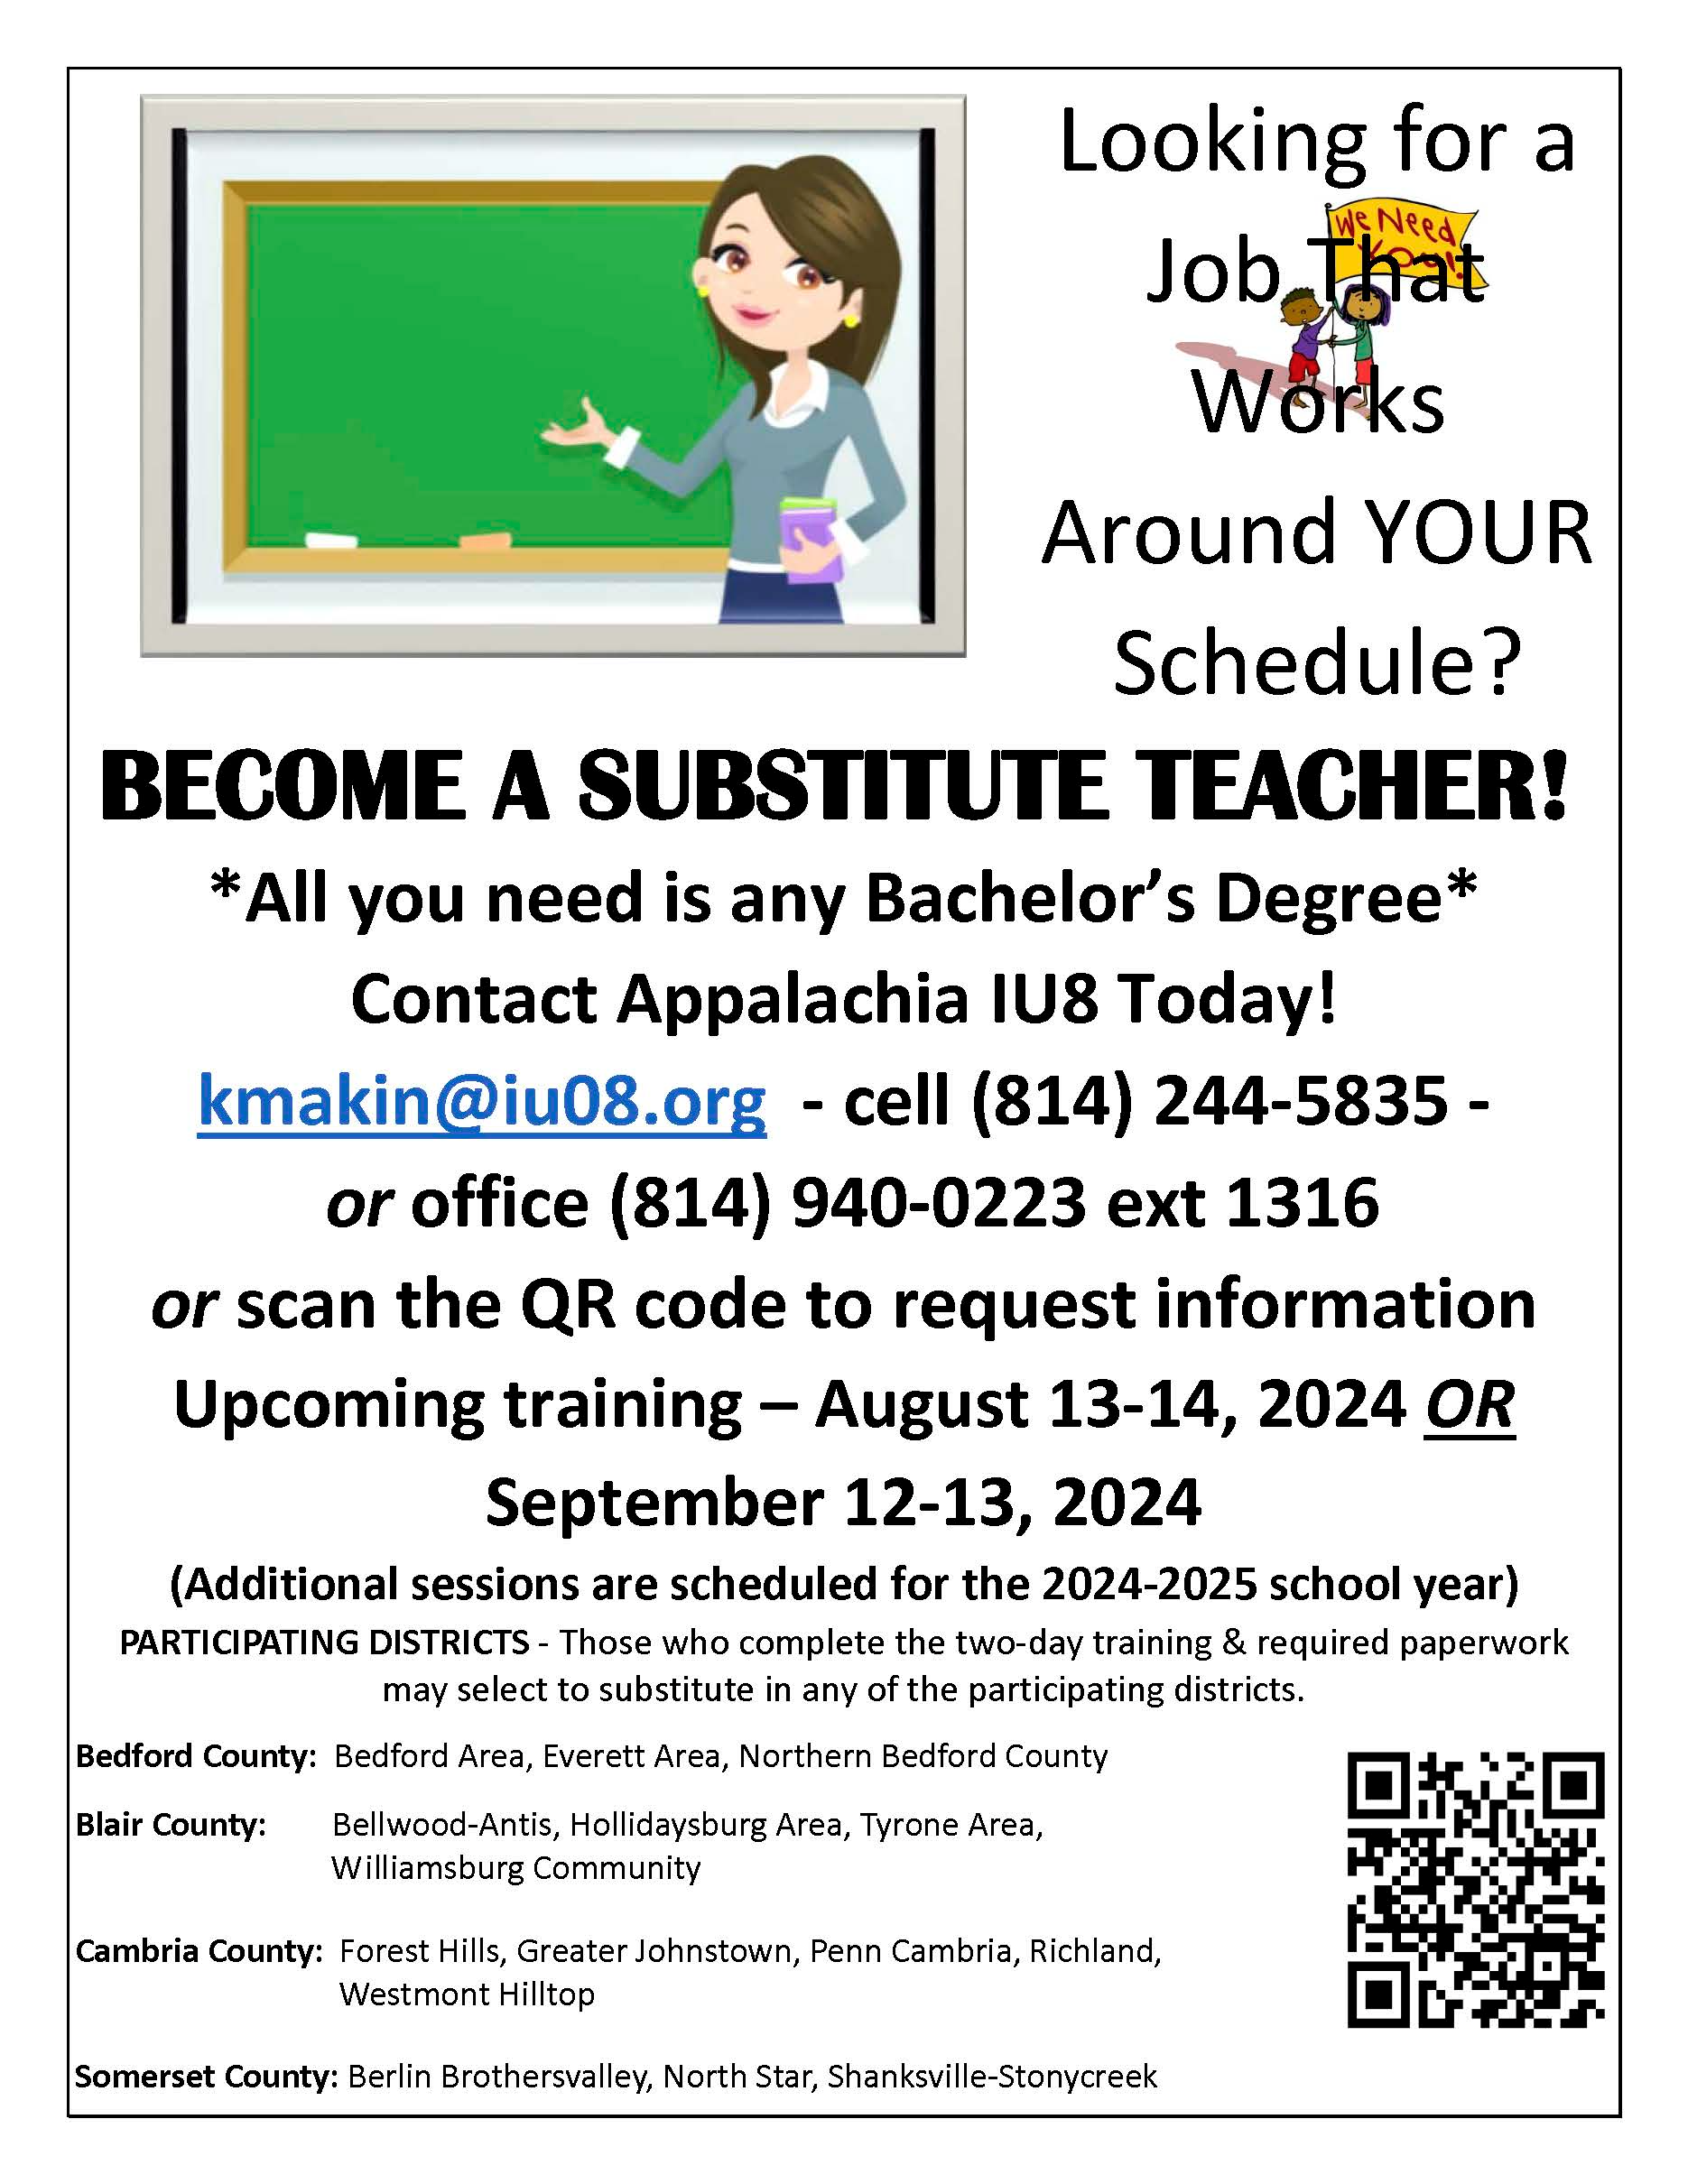 flyer with information about becoming a substitute teacher